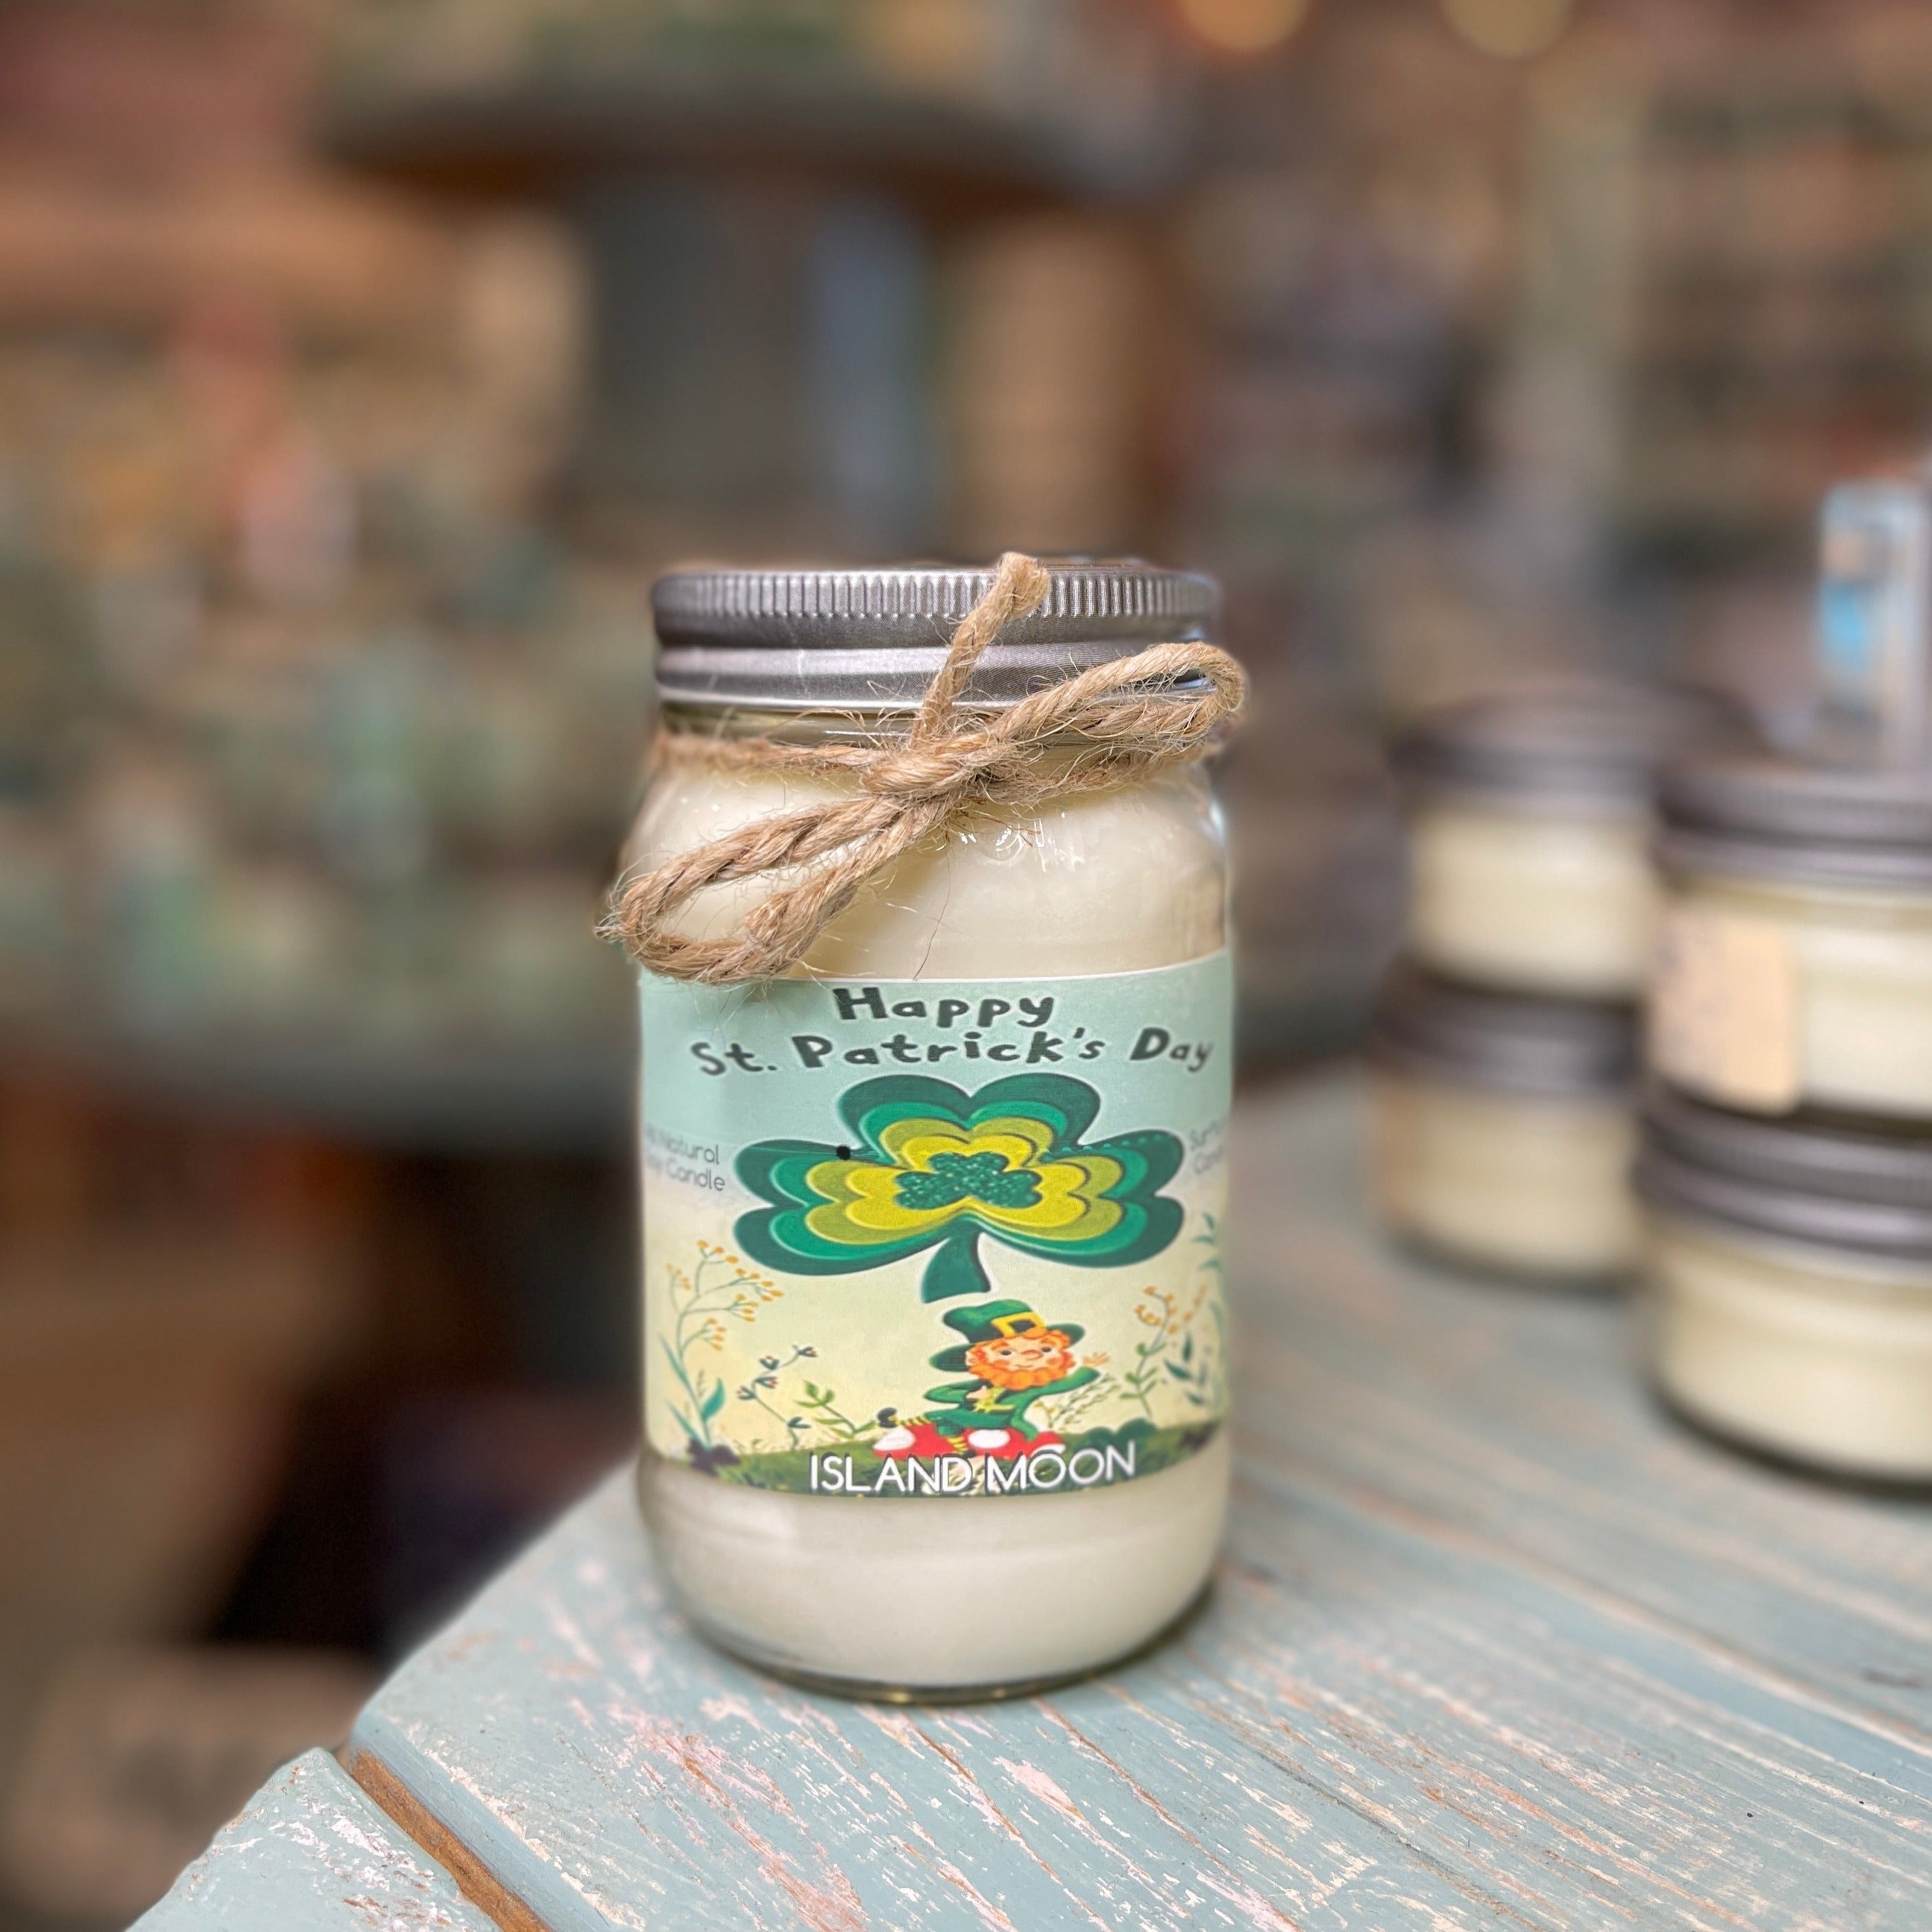 Super Lucky Island Moon Mason Jar Candle - St. Patrick's Day Collection